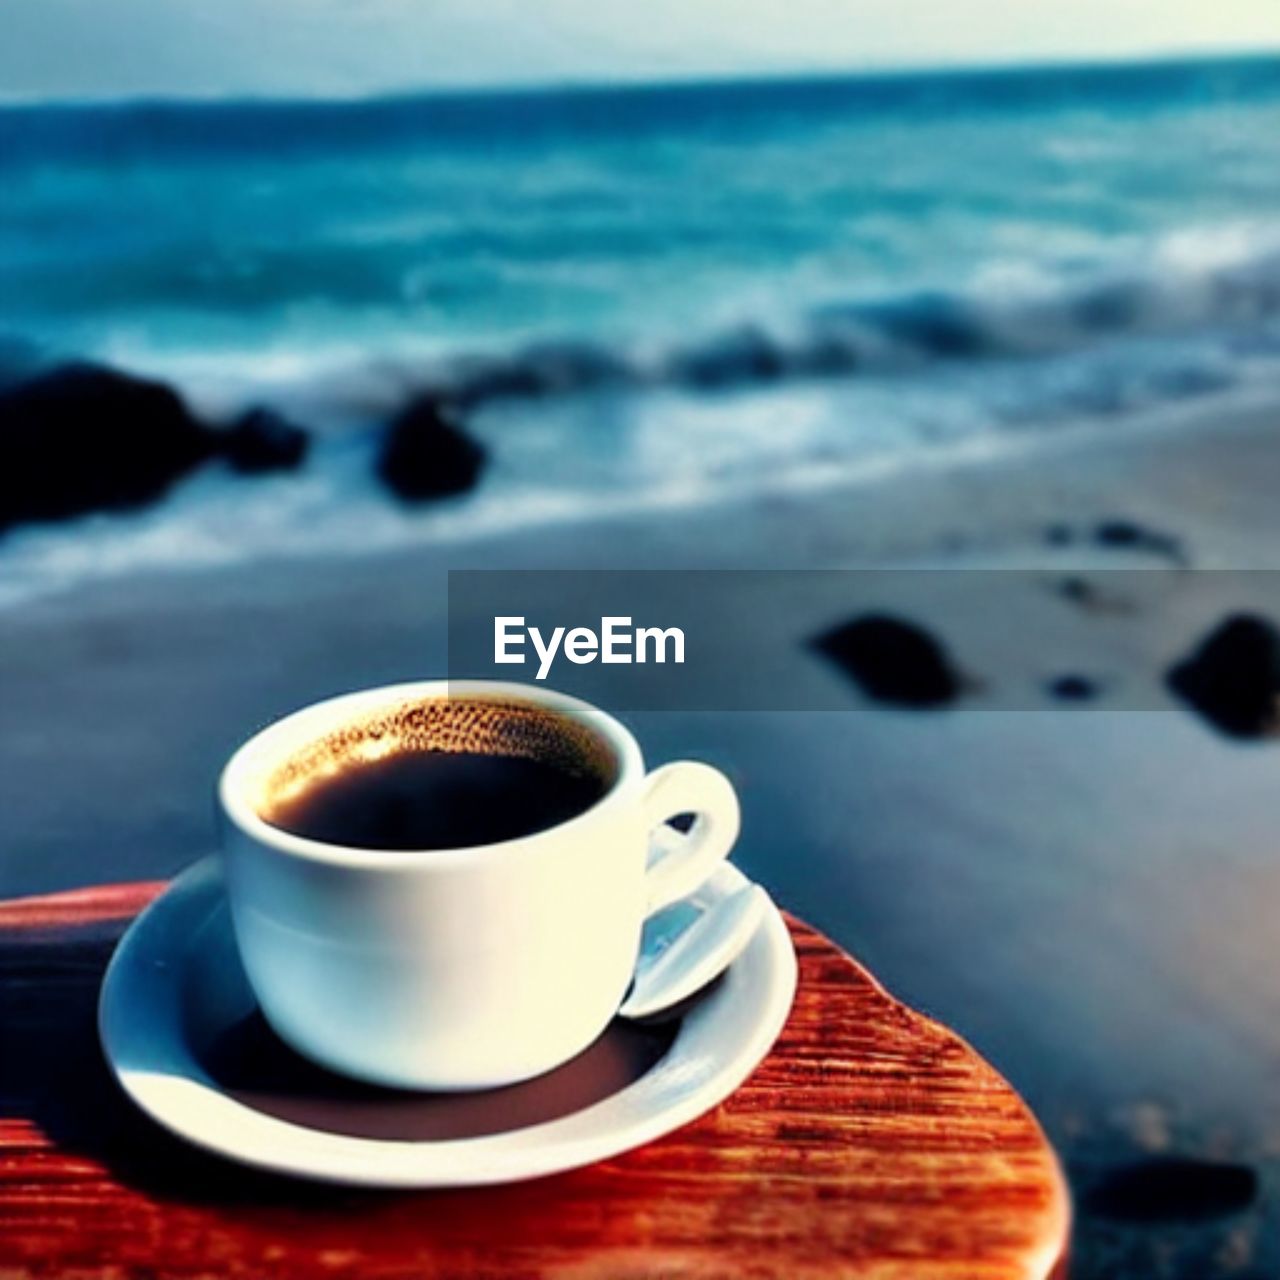 drink, coffee, mug, food and drink, cup, coffee cup, water, refreshment, sea, saucer, beach, land, horizon, morning, nature, crockery, hot drink, focus on foreground, horizon over water, table, blue, no people, relaxation, sky, outdoors, tea, day, heat, freshness, food